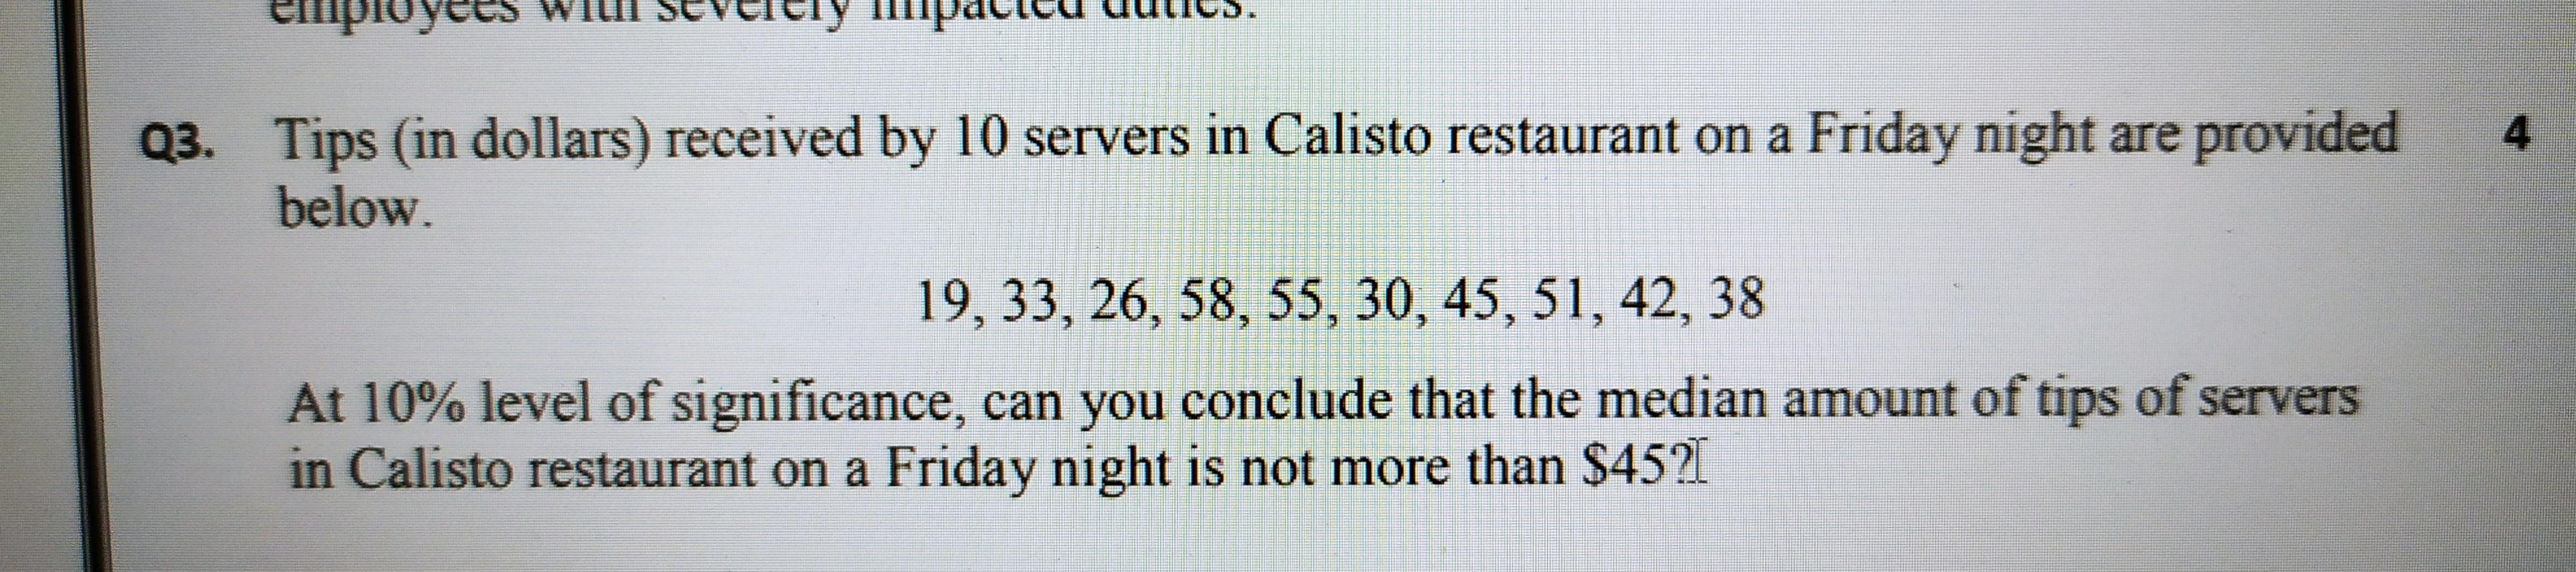 4 Q3 Tips In Dollars Received By 10 Servers In Calisto Restaurant On A Friday Night Are Provided Below 19 33 26 5 1